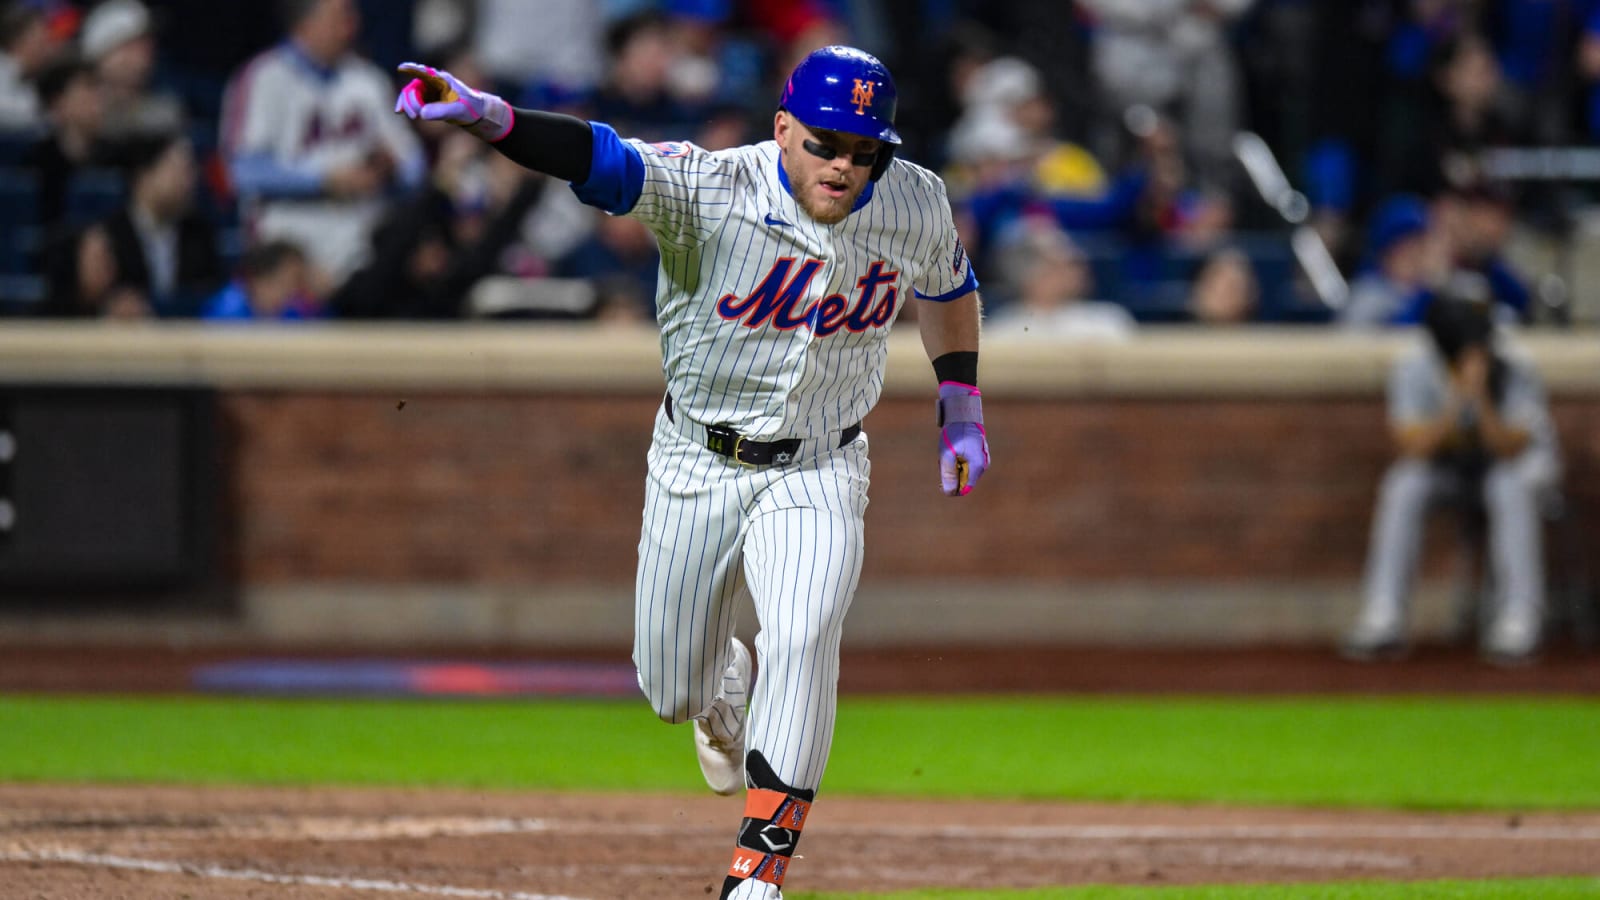 Mets notch fourth win in last five games over Pirates & gain ground in NL East